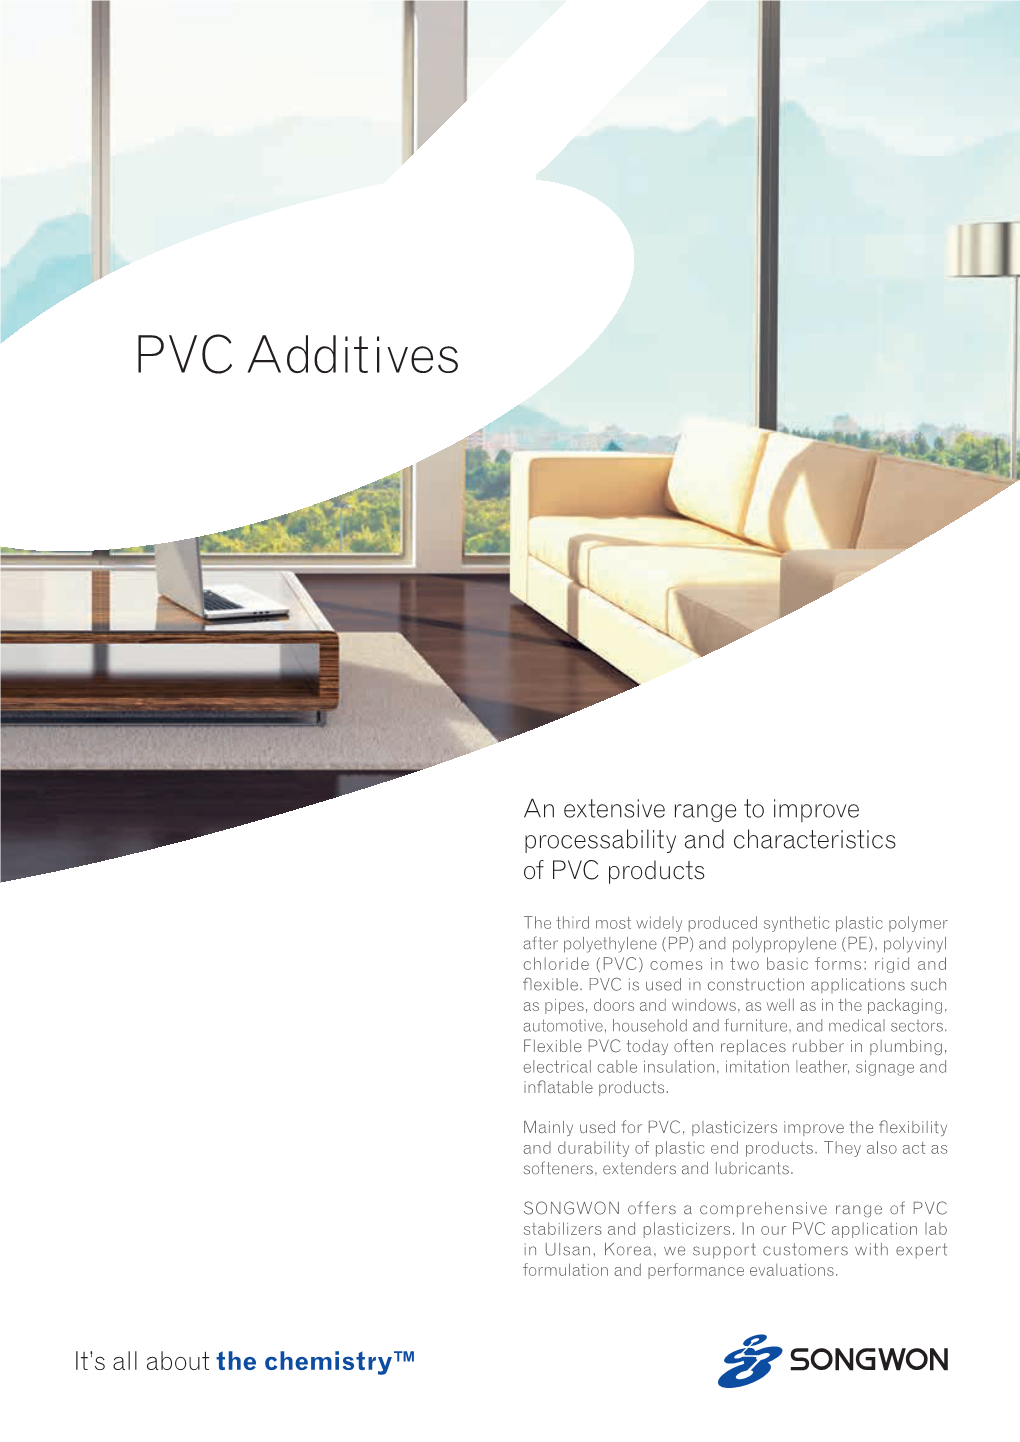 (PVC) Additives and Plasticizers